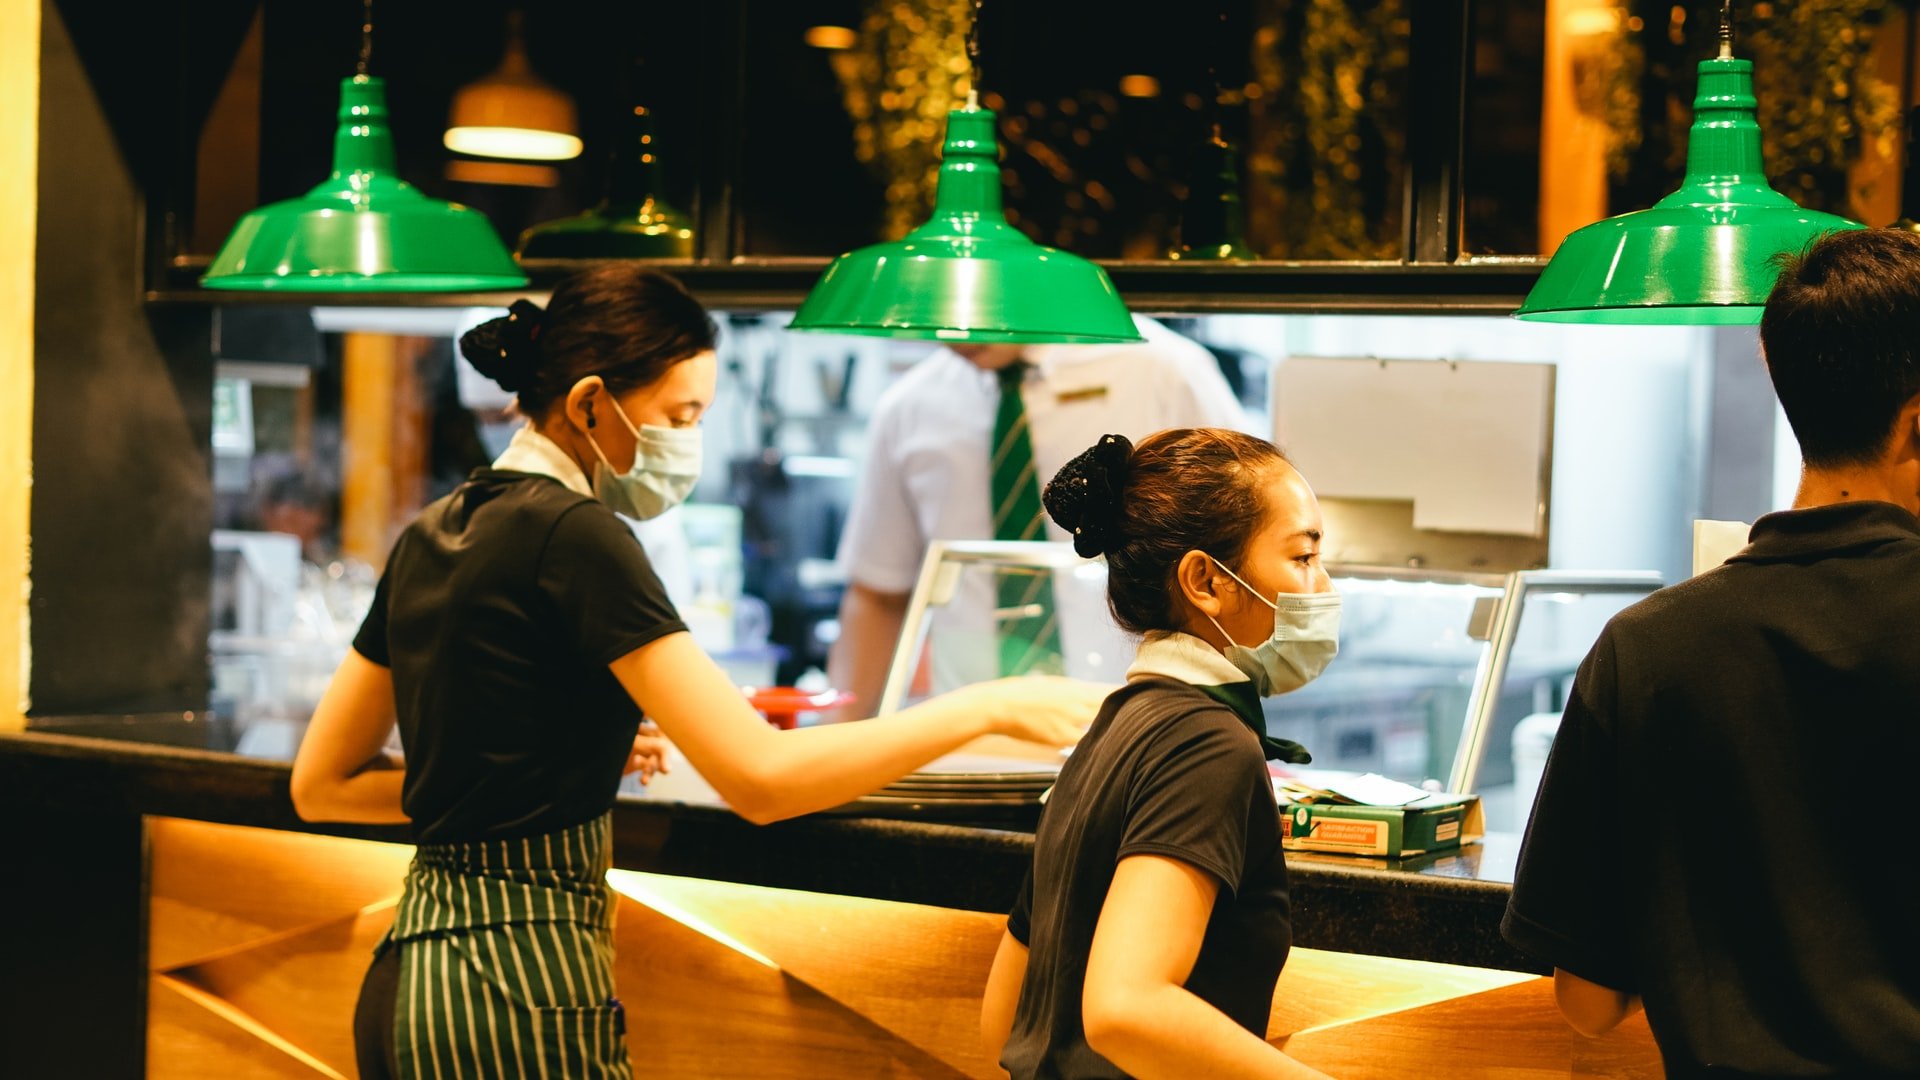 OP's daughter worked as a part-time waitress | Source: Unsplash